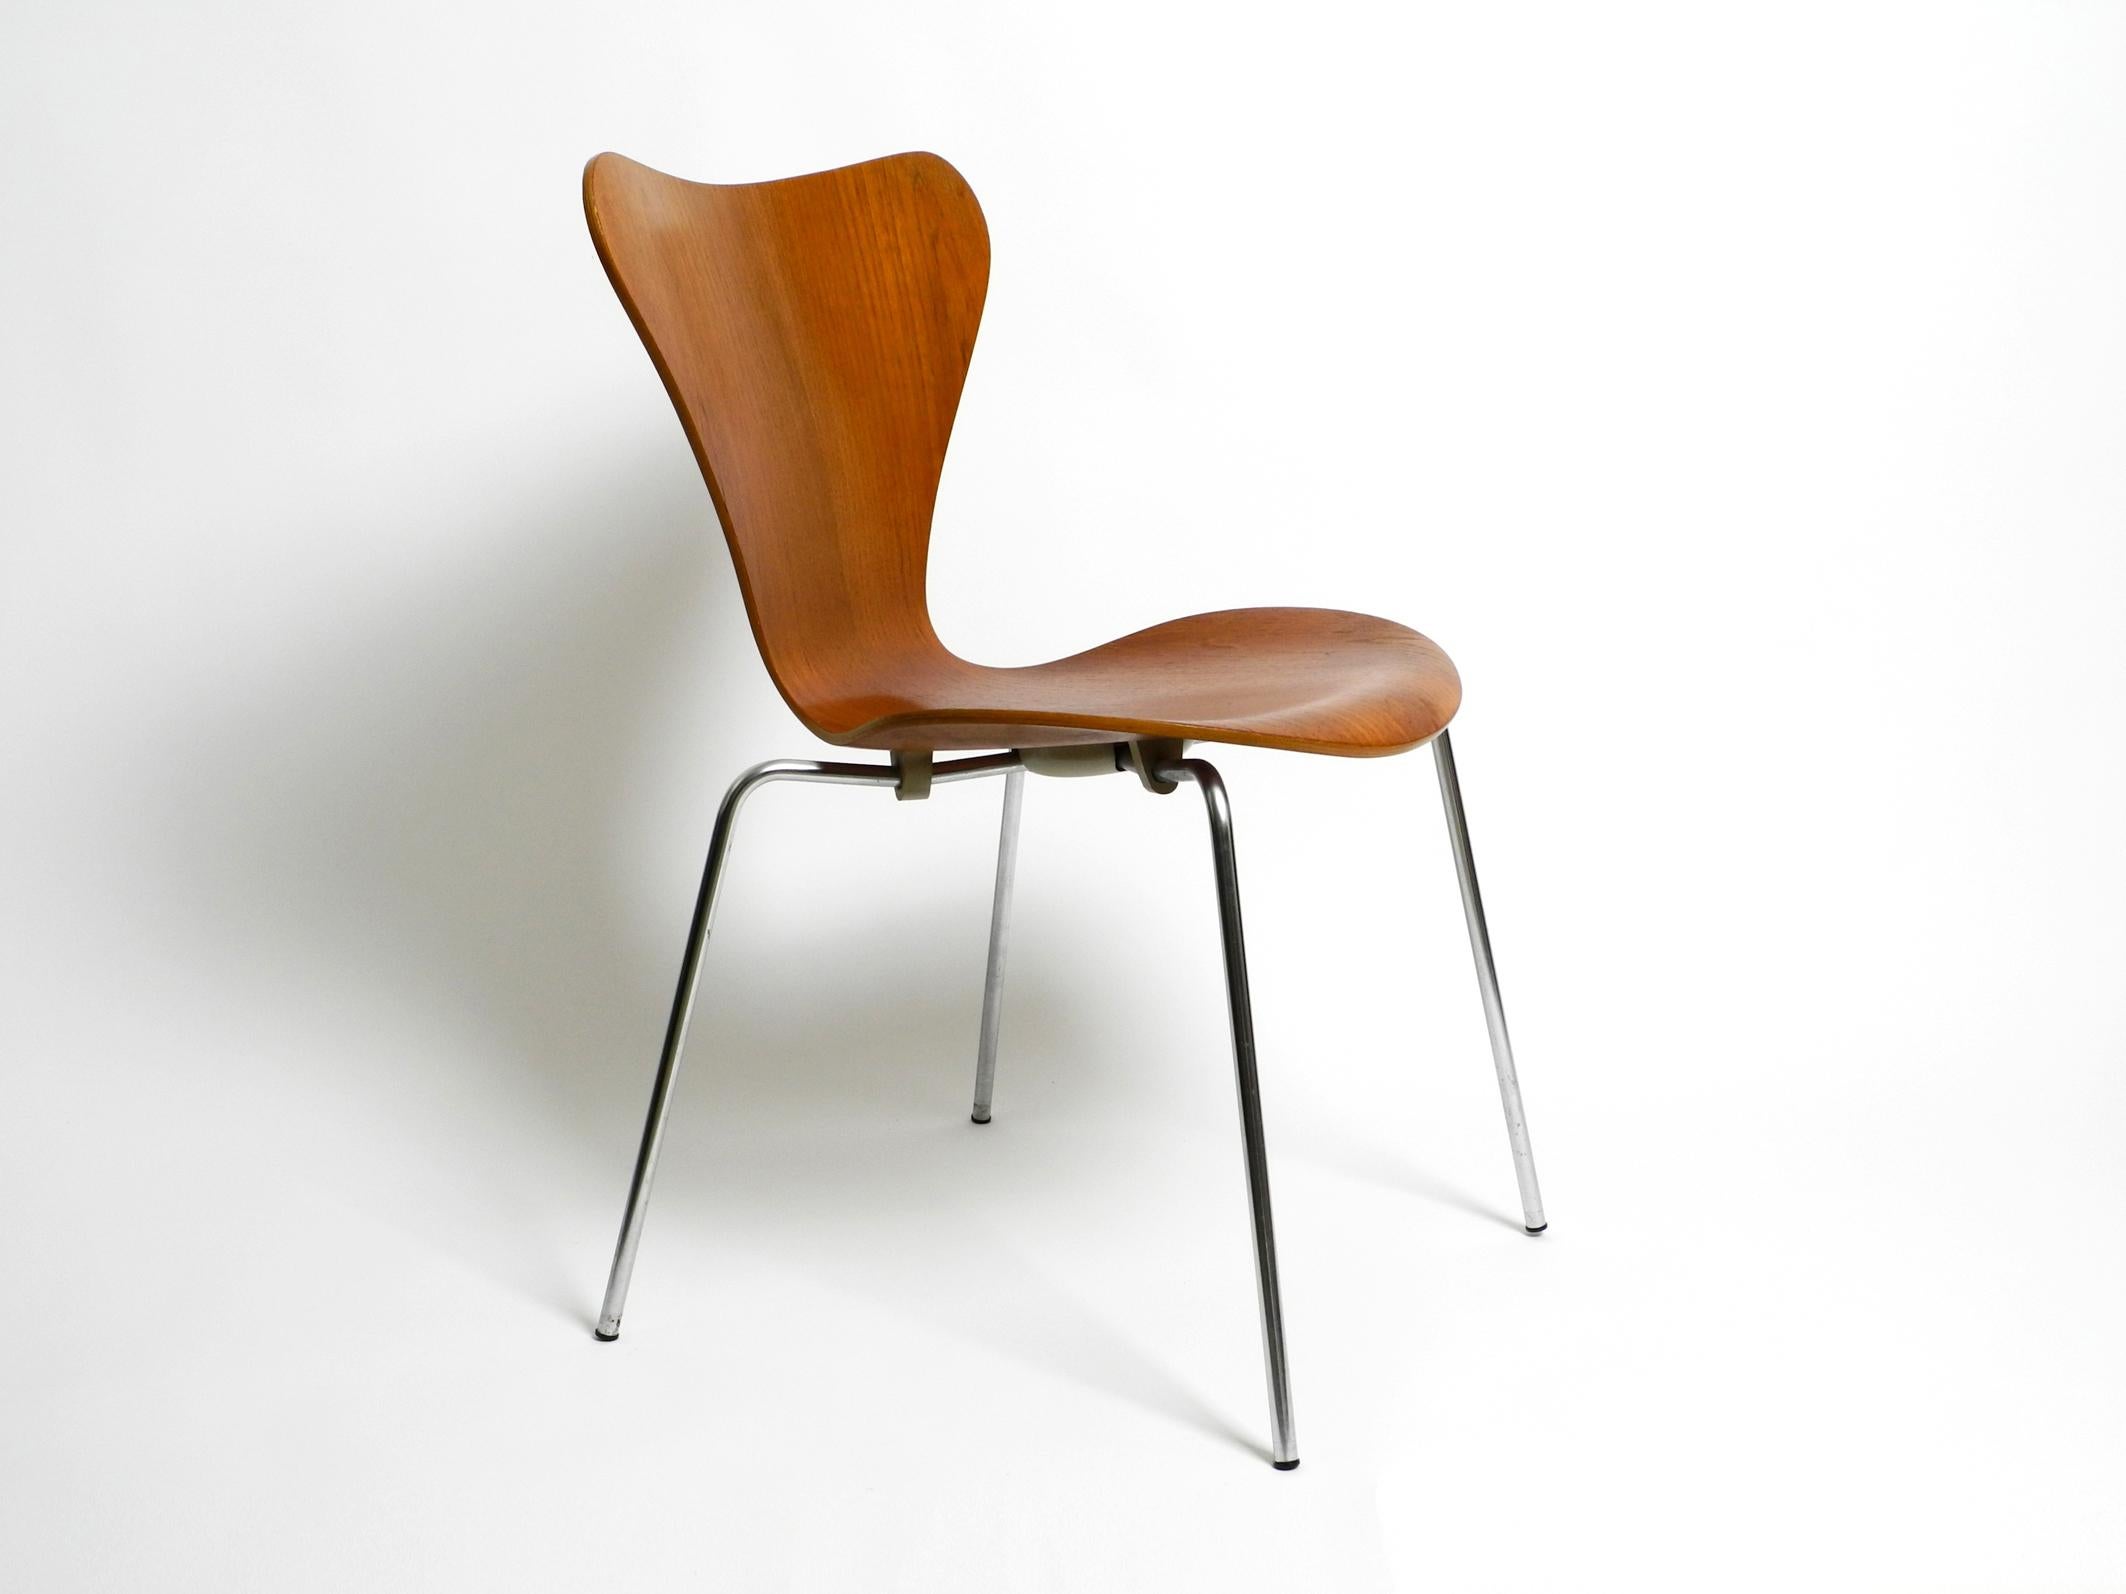 Original Arne Jacobsen chair made of layered plywood with a rare teak veneer from 1972. Model 3107. Made by Fritz Hansen Denmark.
This model is from the third production generation with the centrally screwed plastic cap, produced since the early